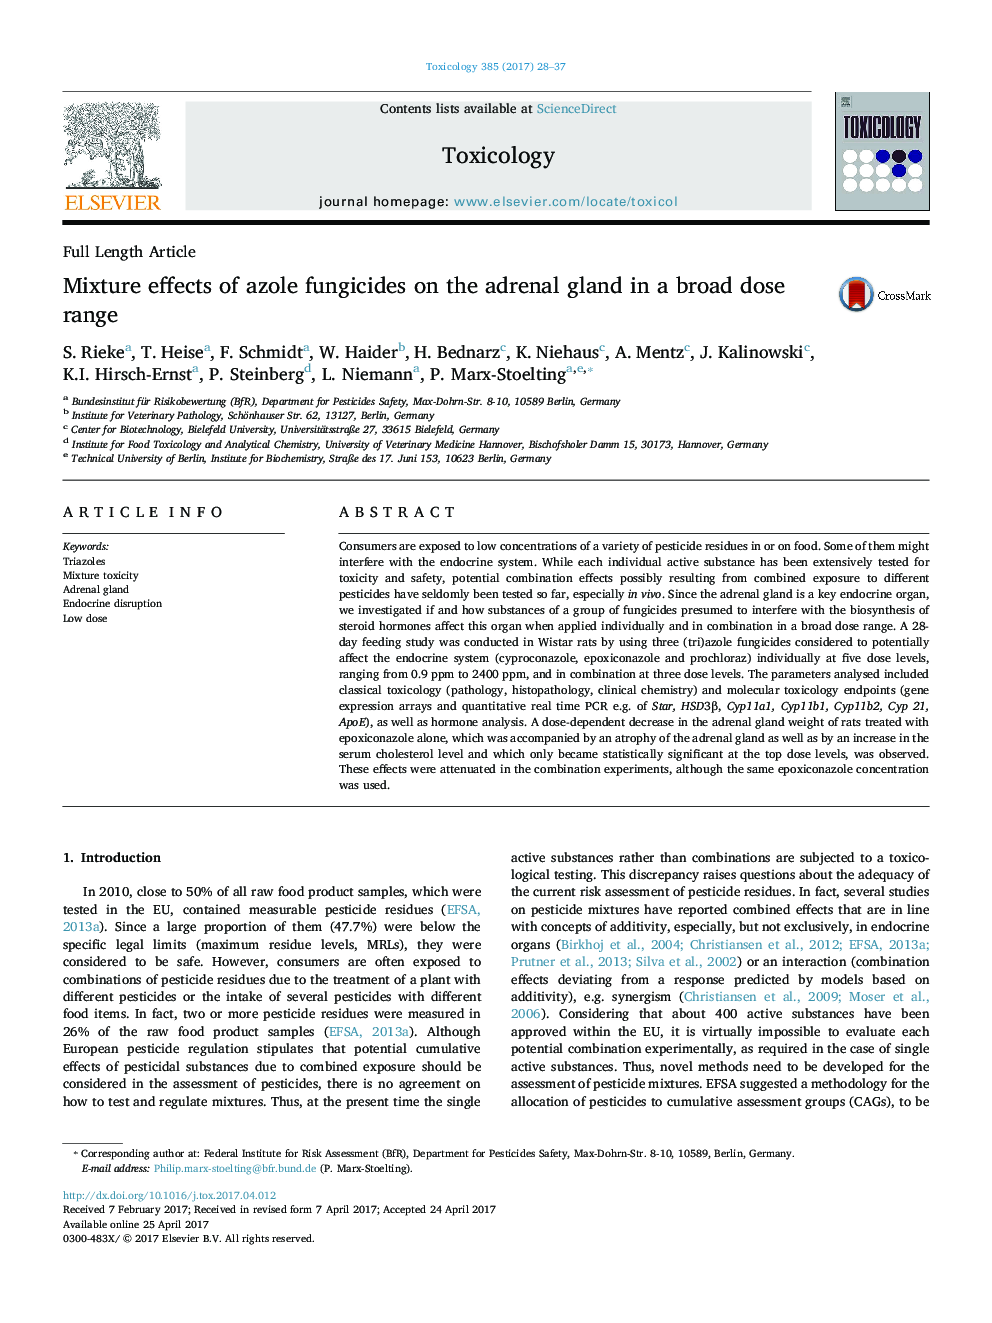 Mixture effects of azole fungicides on the adrenal gland in a broad dose range